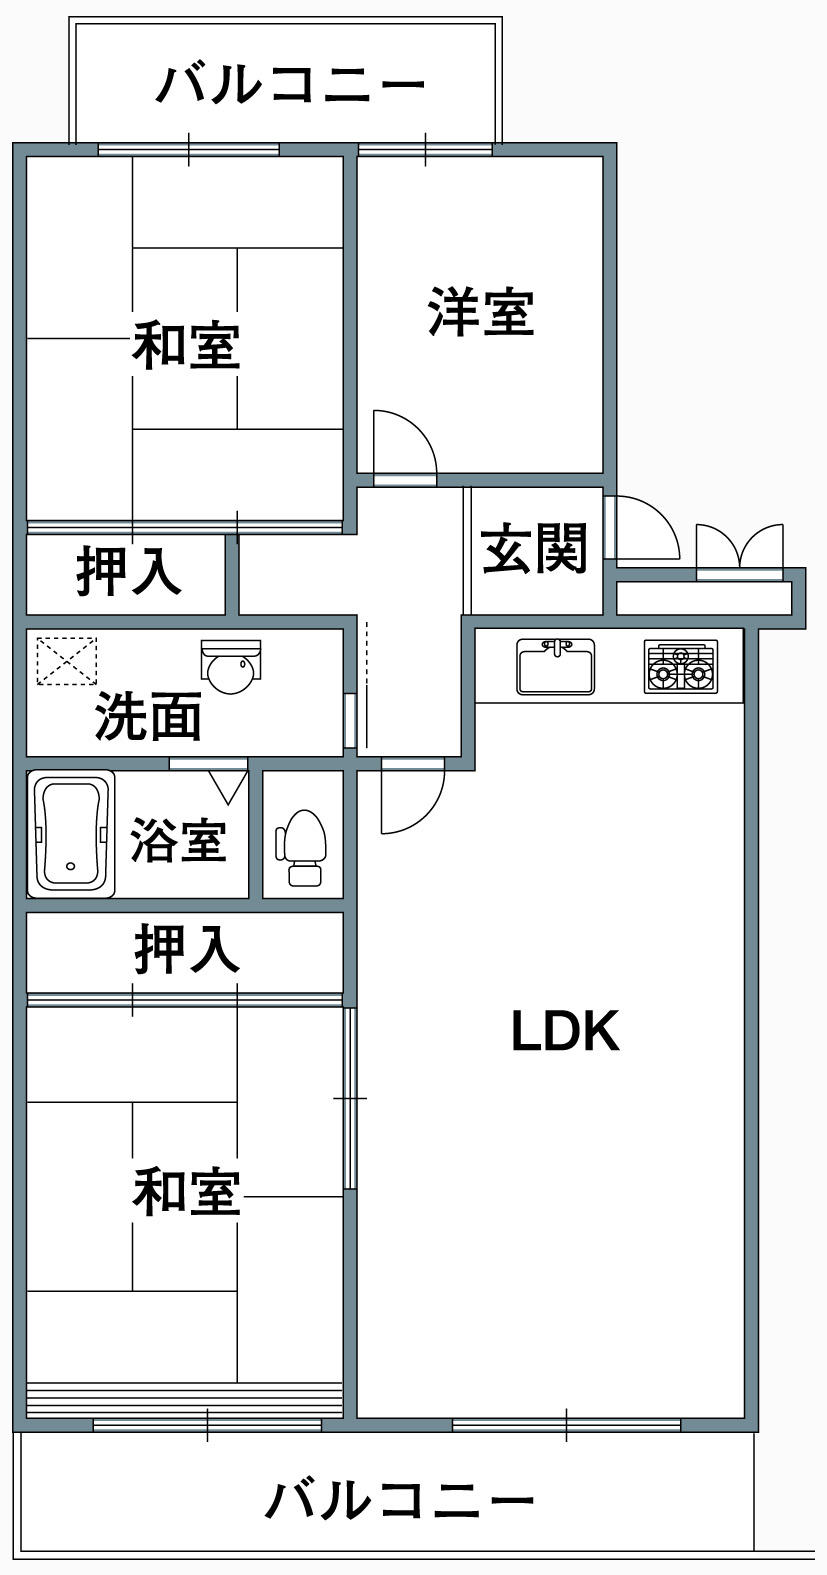 Floor plan. 3LDK, Price 4.5 million yen, Occupied area 68.38 sq m , Balcony area is 11.64 sq m 2 sided balcony. South is facing.